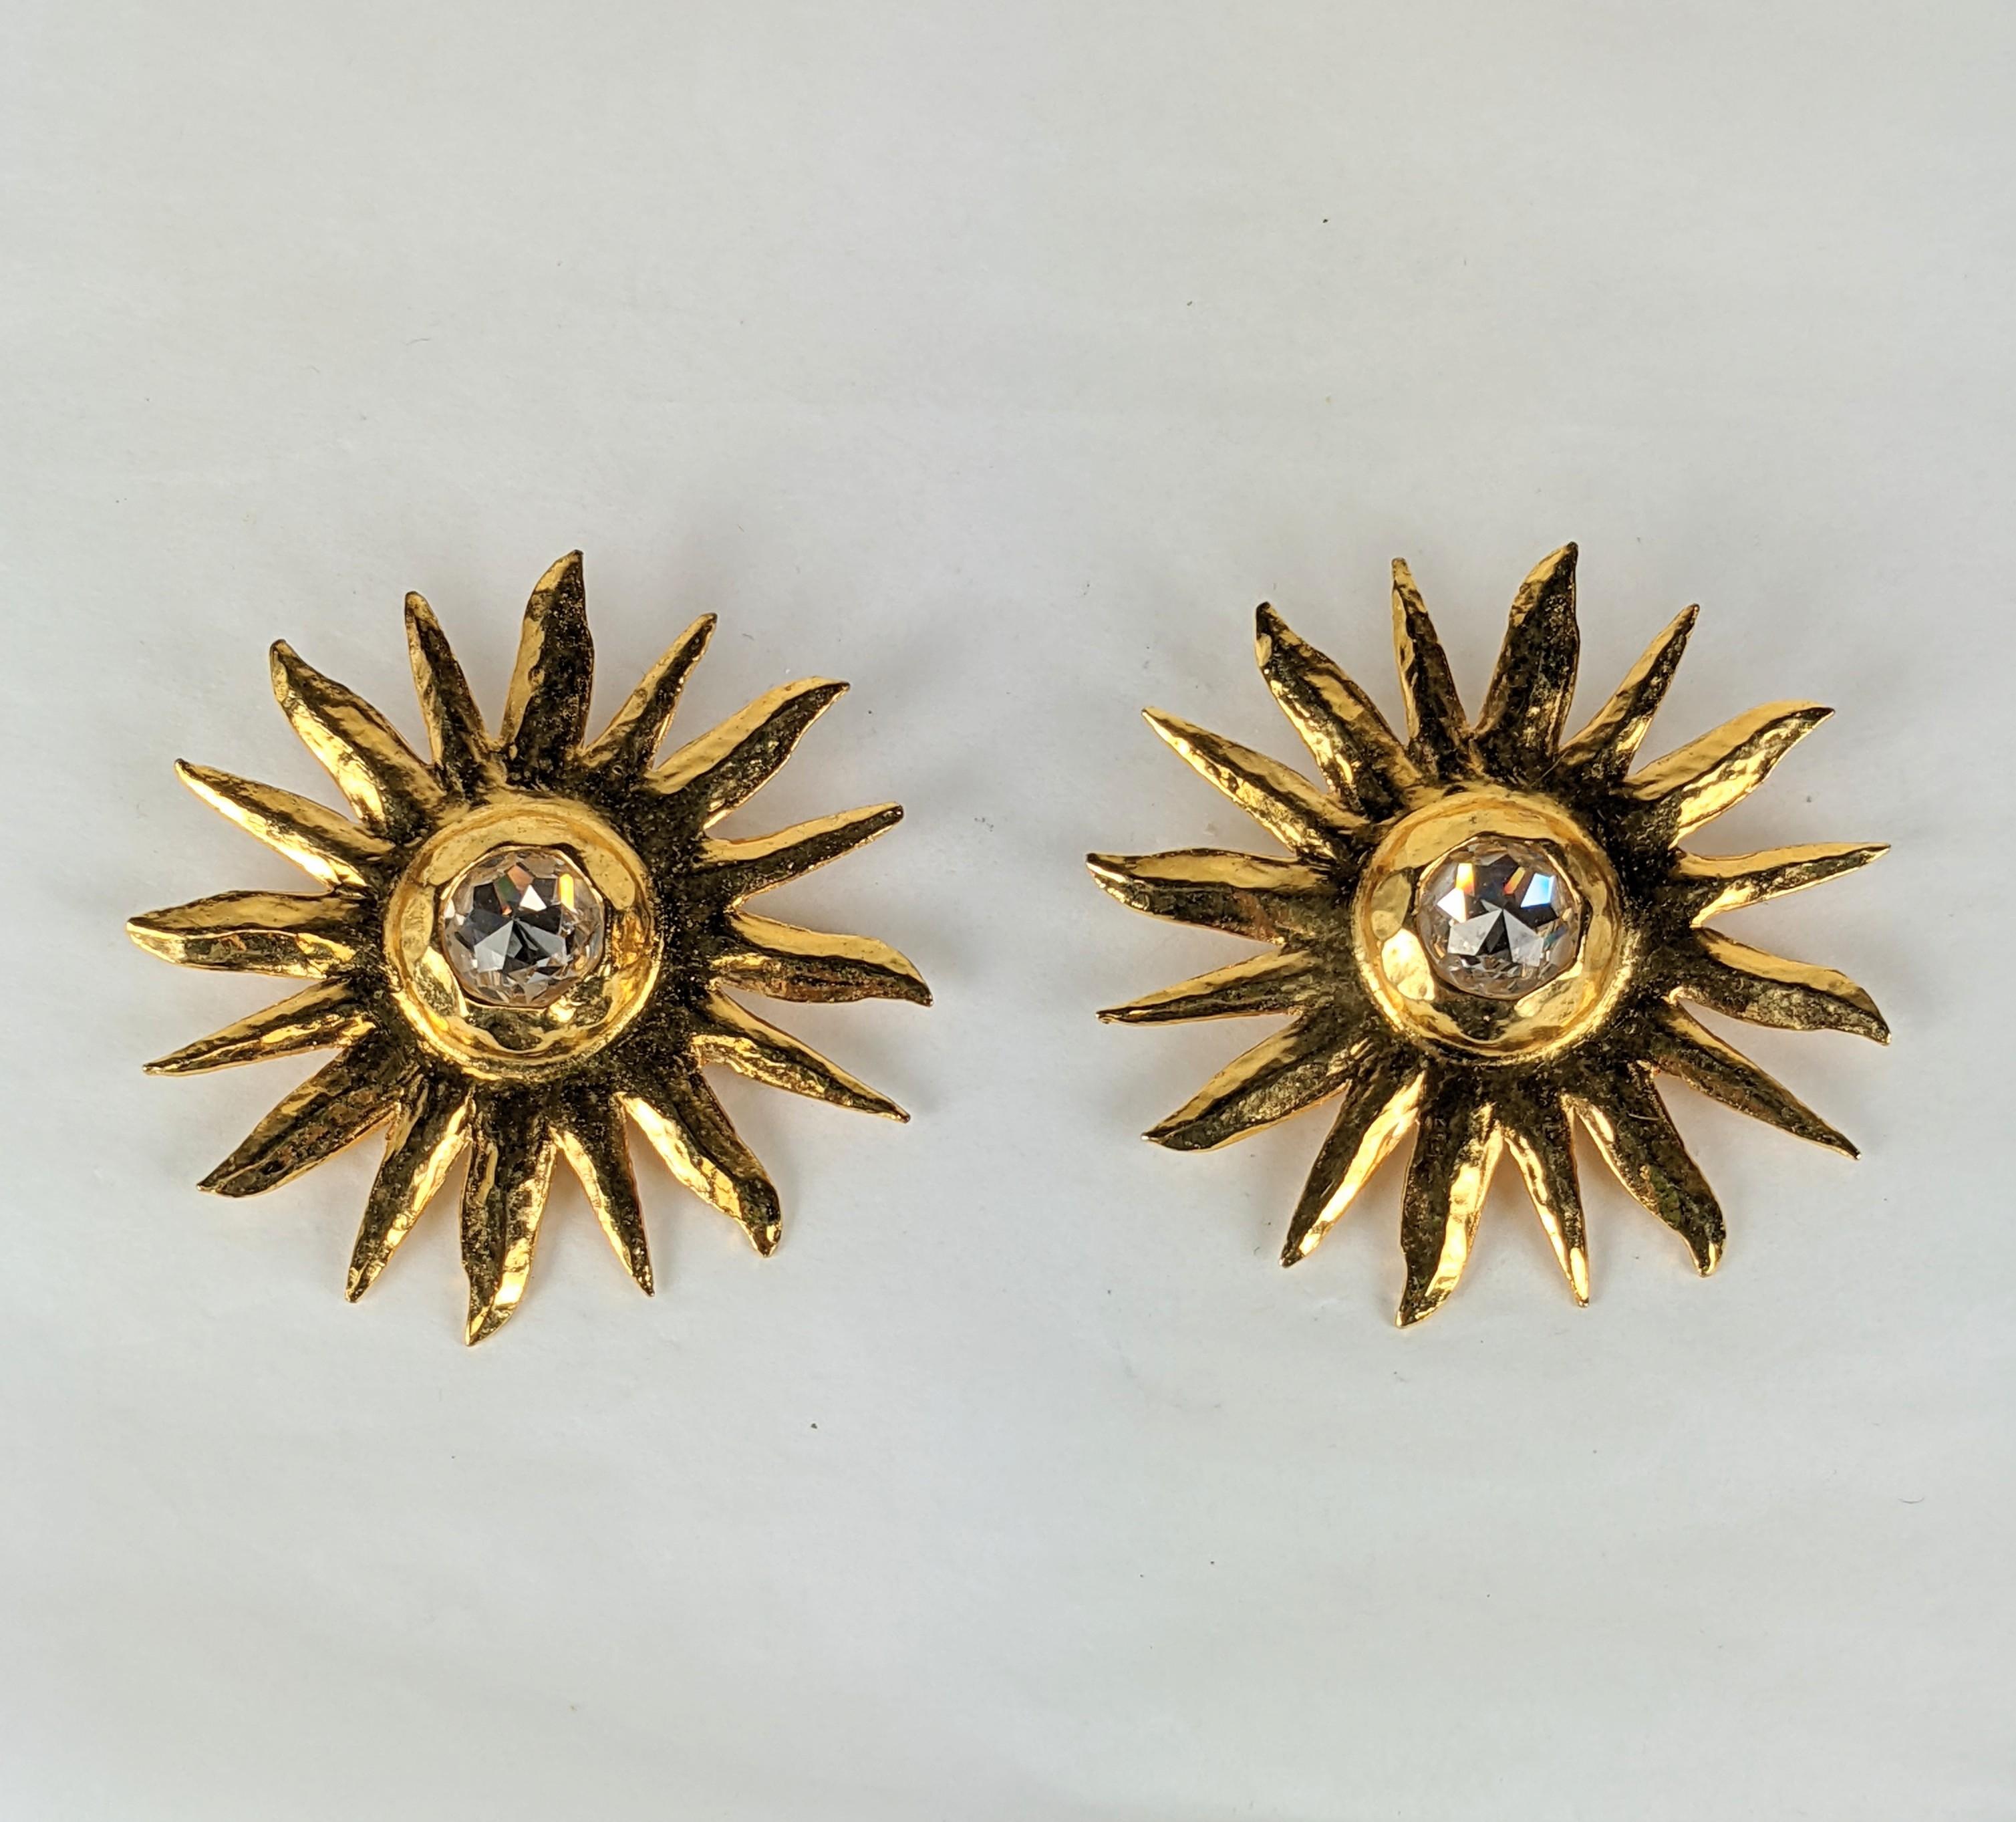 Striking Yves Saint Laurent Hammered Gold Sunburst Earrings from the late 1980's. Made by Maison Goossens with a rose cut crystal at center. Light in weight but large in scale.
2.5